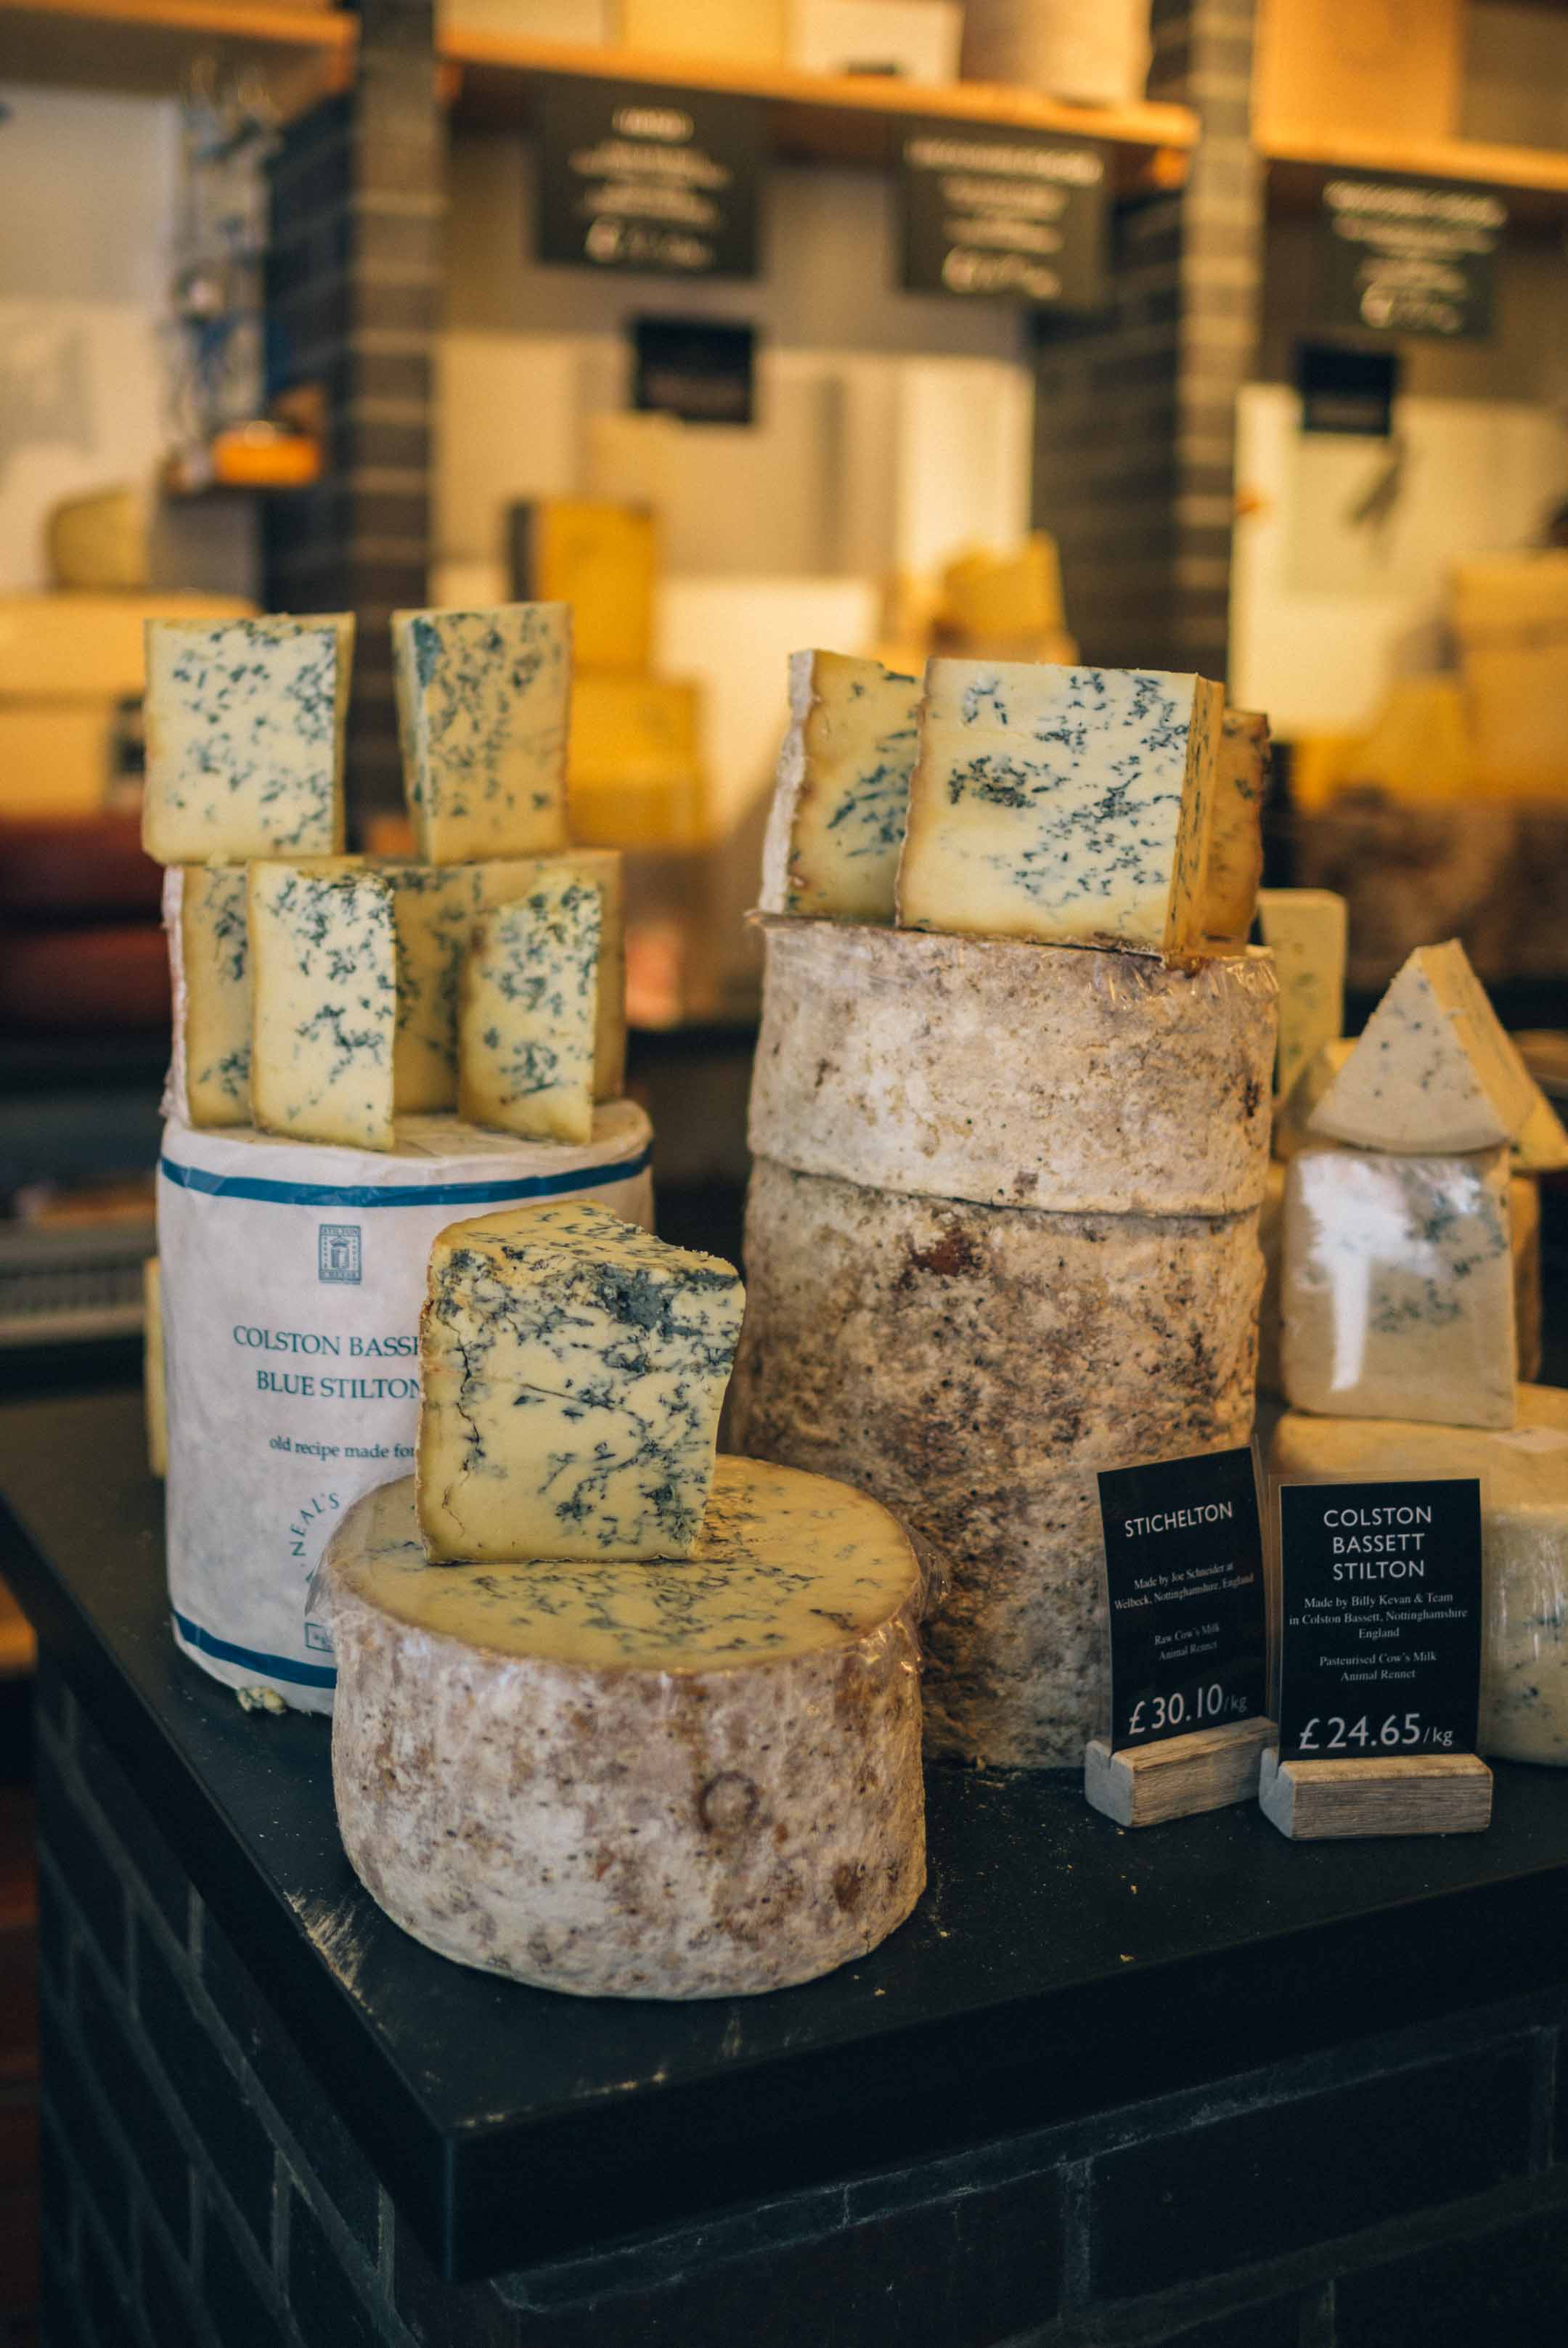 How to Store Cheese: Expert Cheesemongers, Cheesemakers and Food